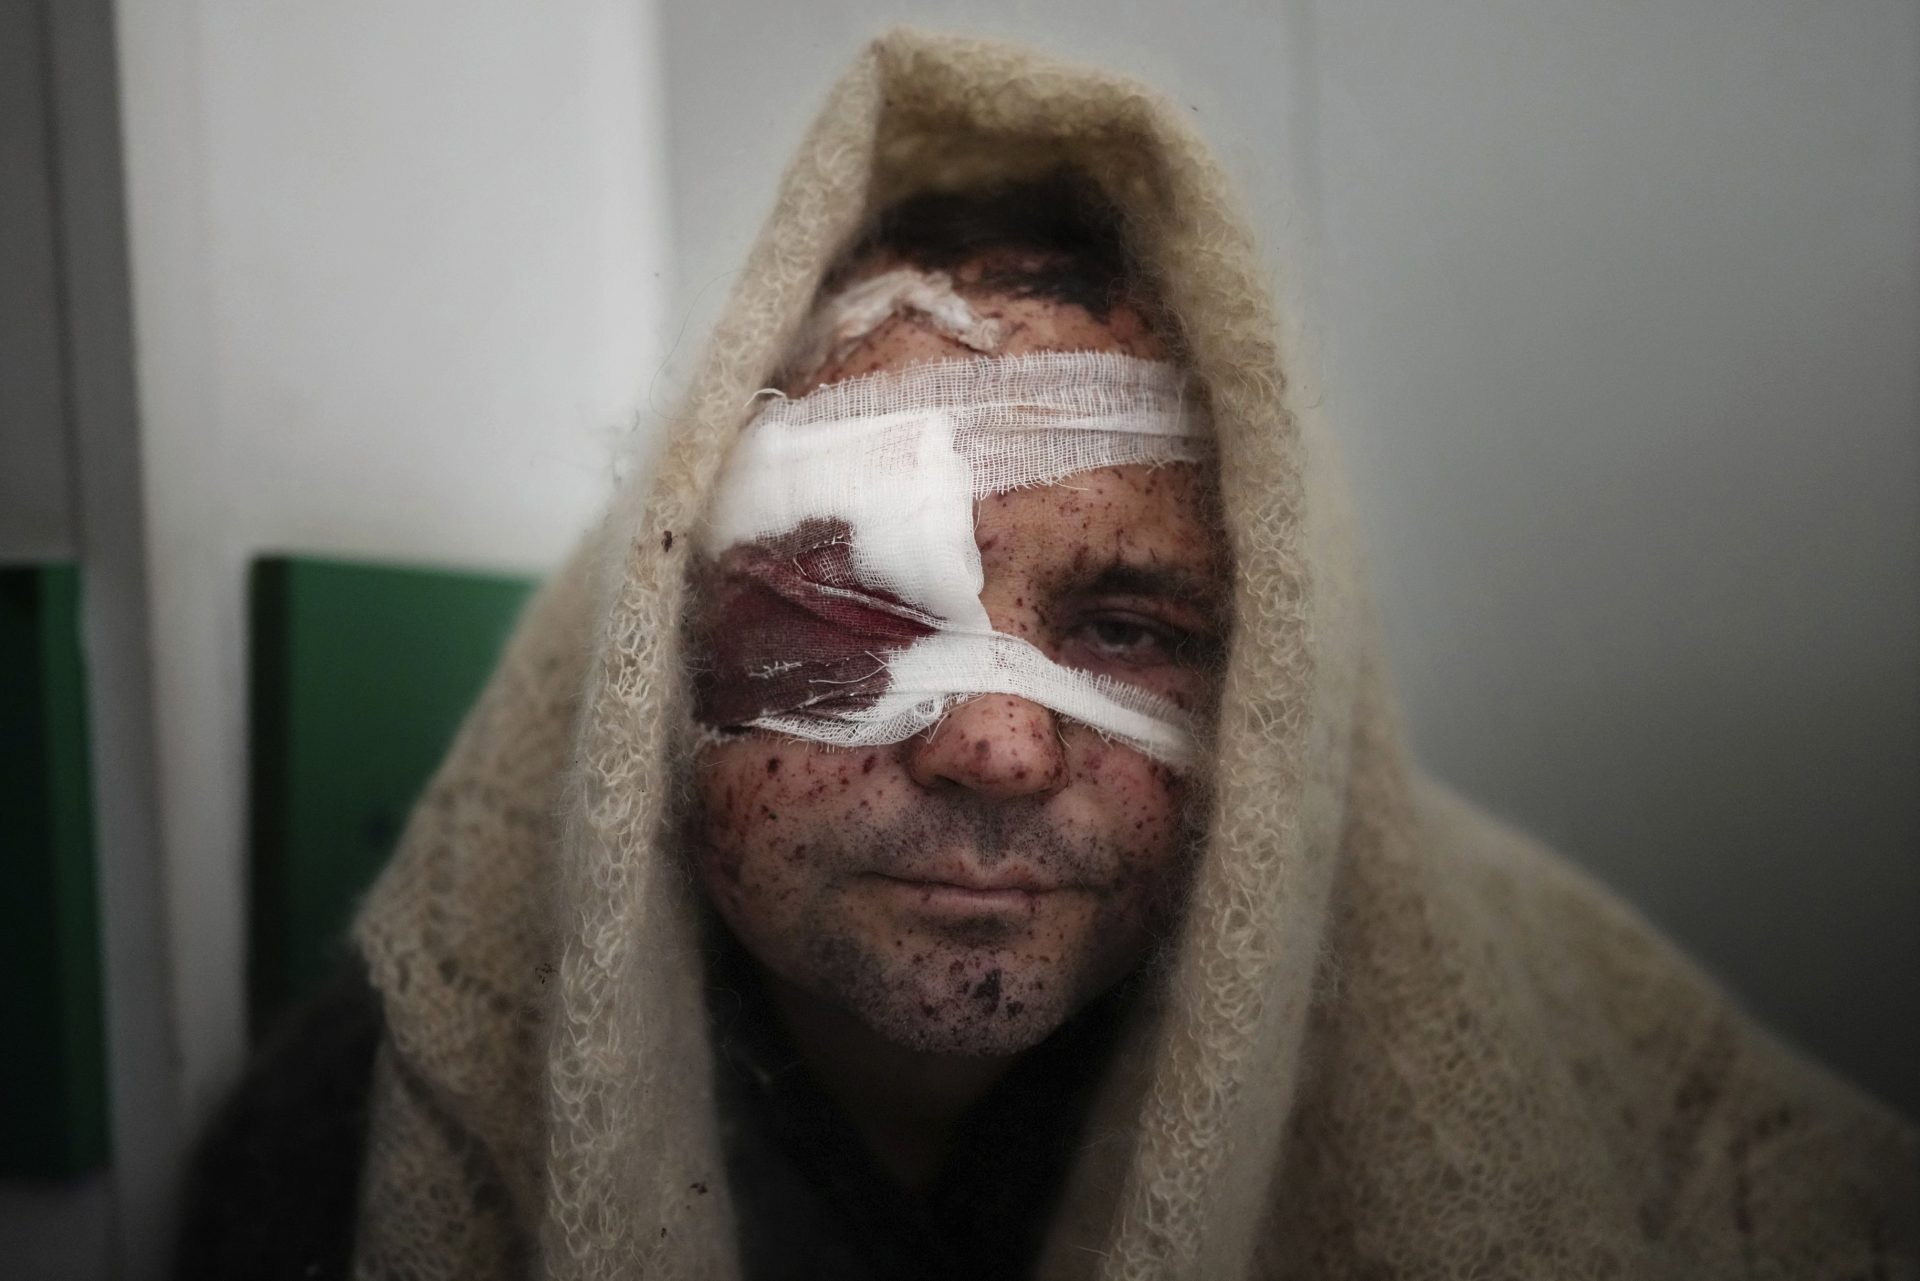 Serhiy Kralya, 41, looks at the camera after surgery at a hospital in Mariupol, eastern Ukraine on Friday, March 11, 2022. Kralya was injured during shelling by Russian forces.